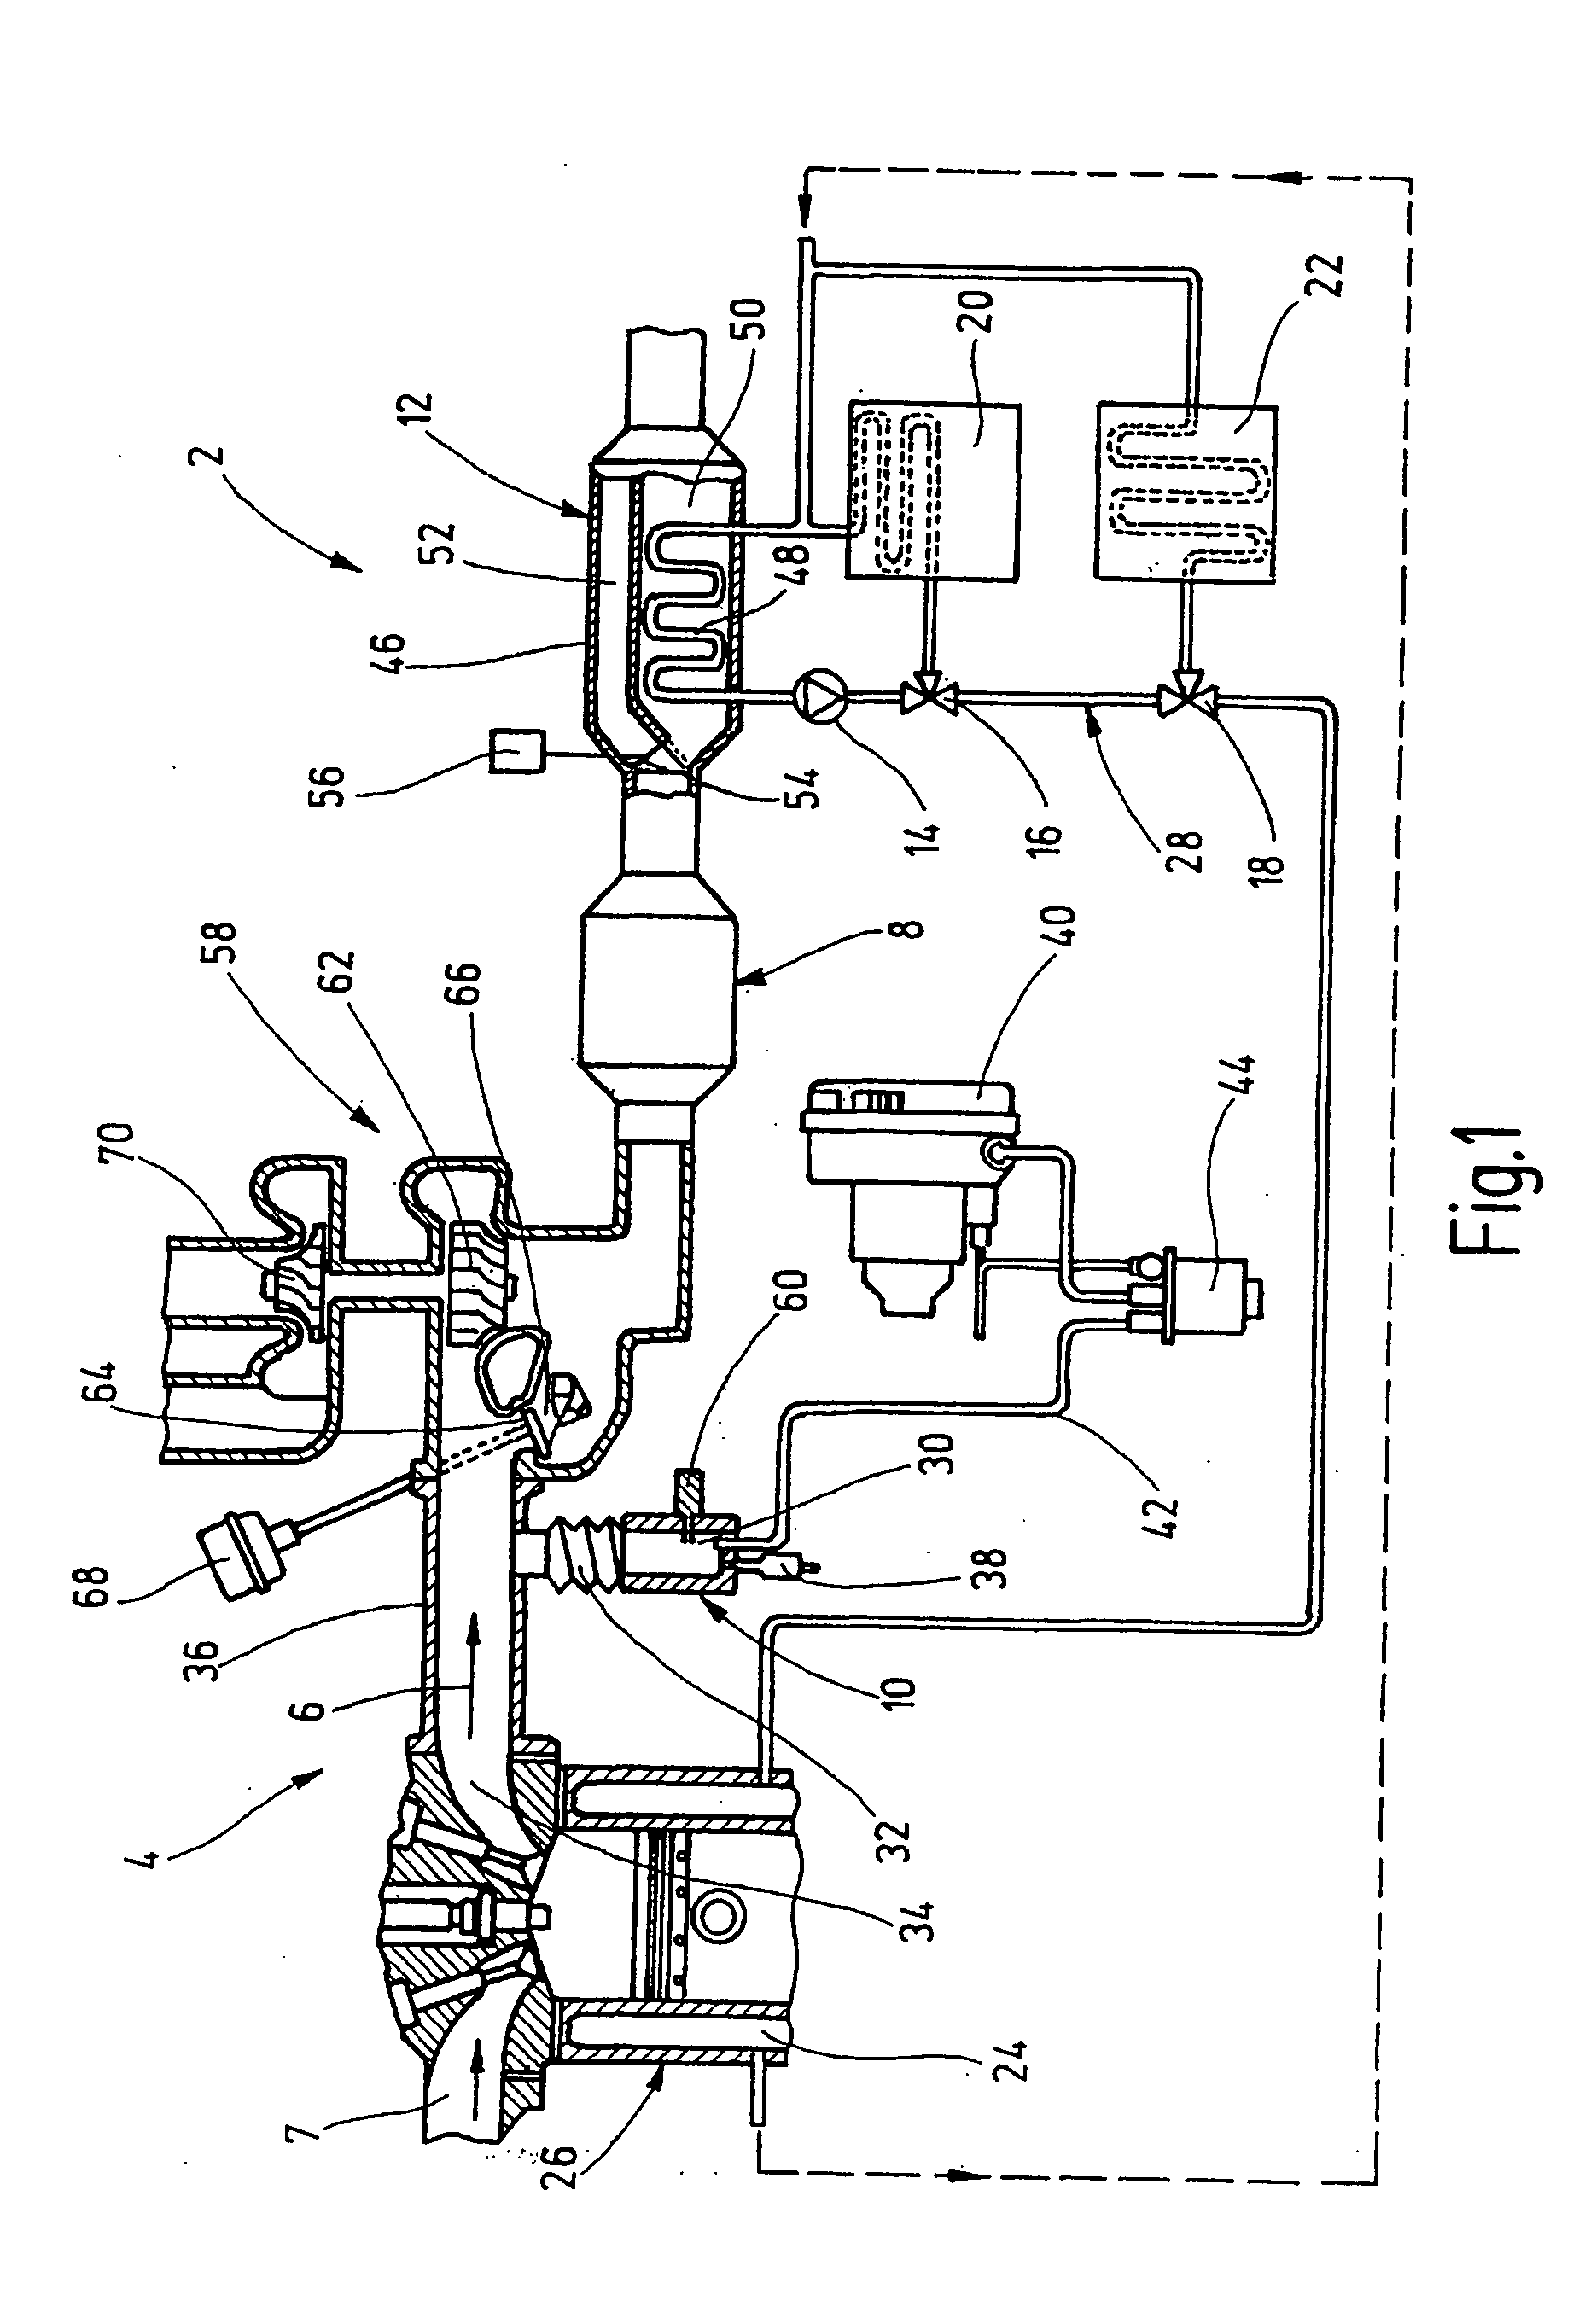 Heating and/or cooling system for a motor vehicle